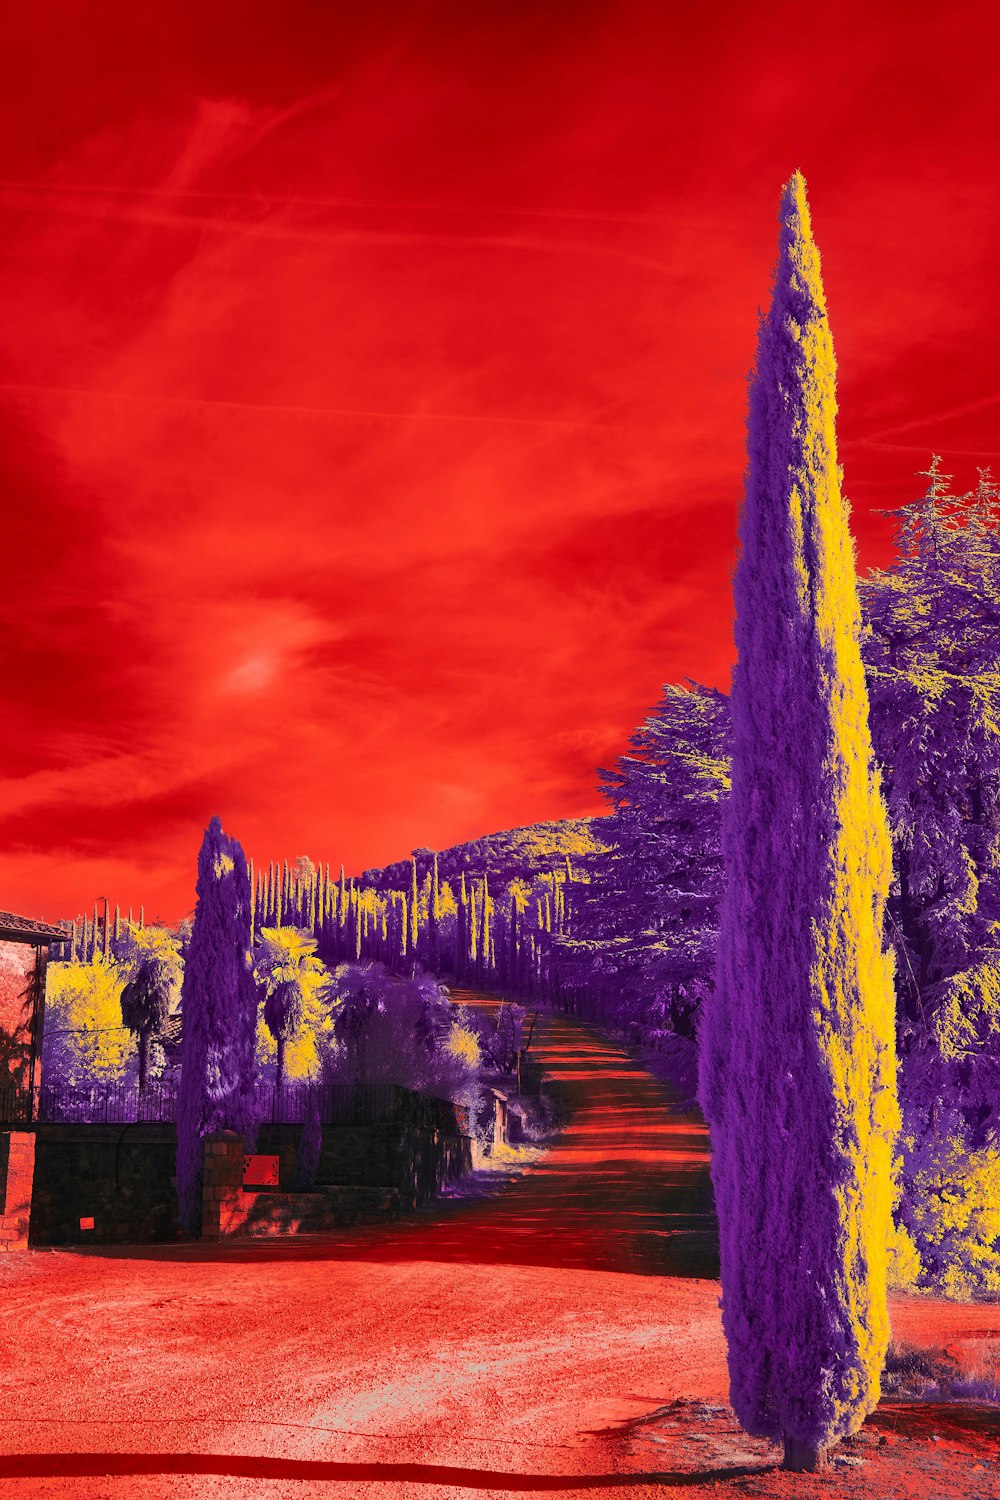 a painting of a red sky with purple trees